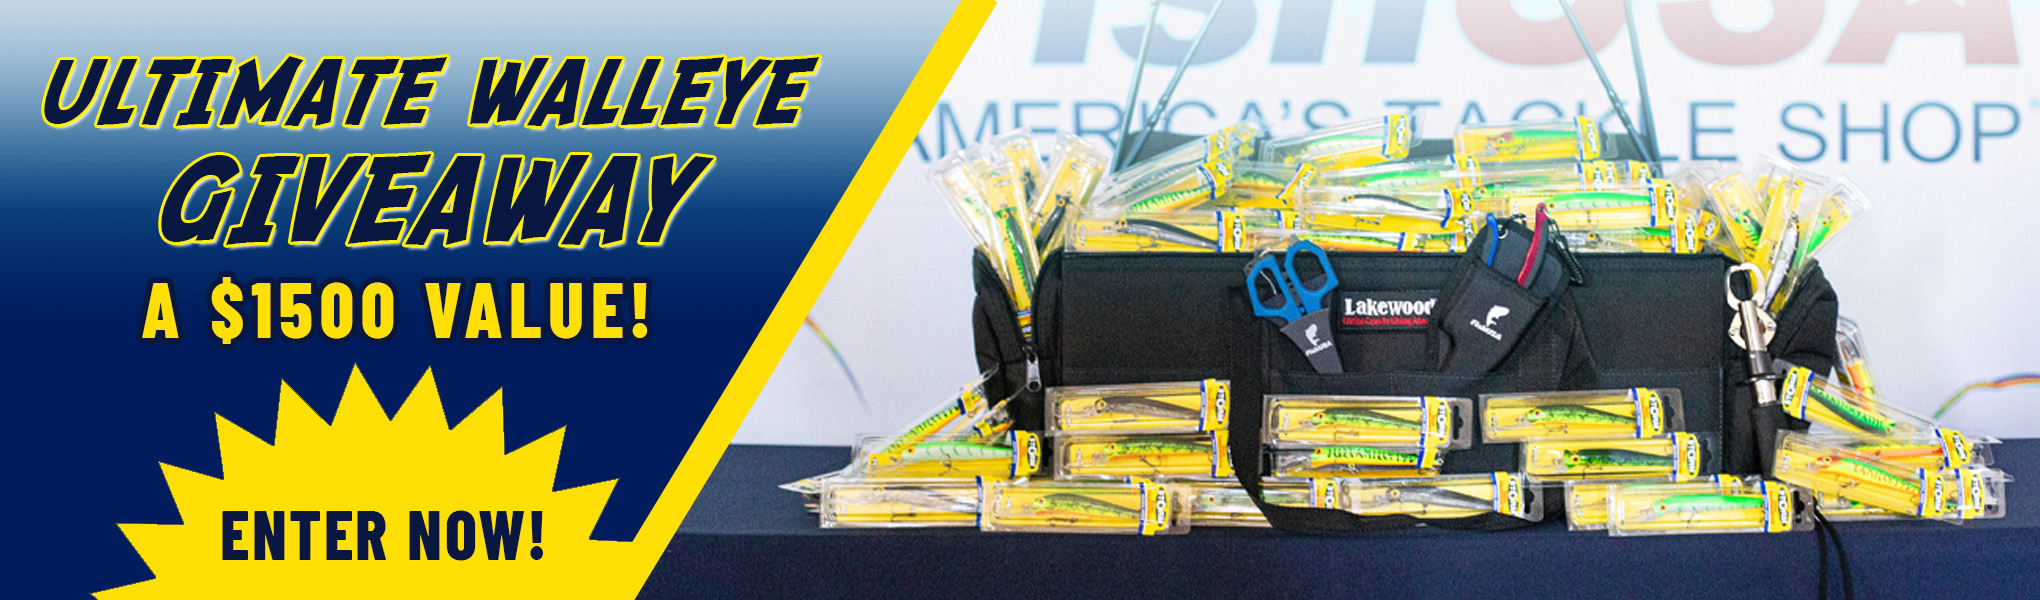 Ultimate Walleye Giveaway  A $1500 Value! Enter Now!